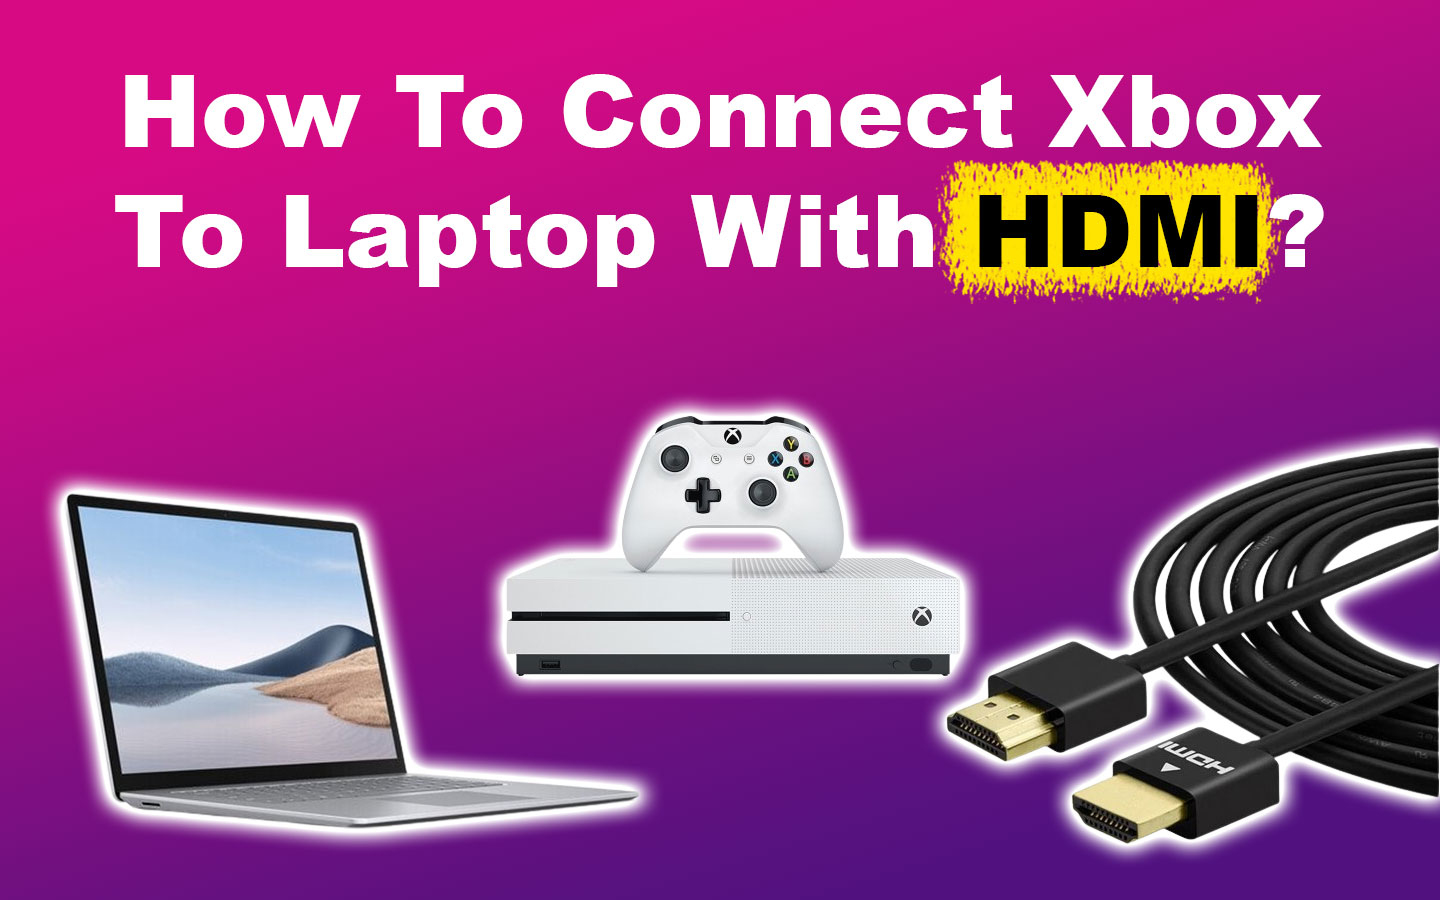 Connect Xbox To Laptop Via HDMI [Easy Steps!]